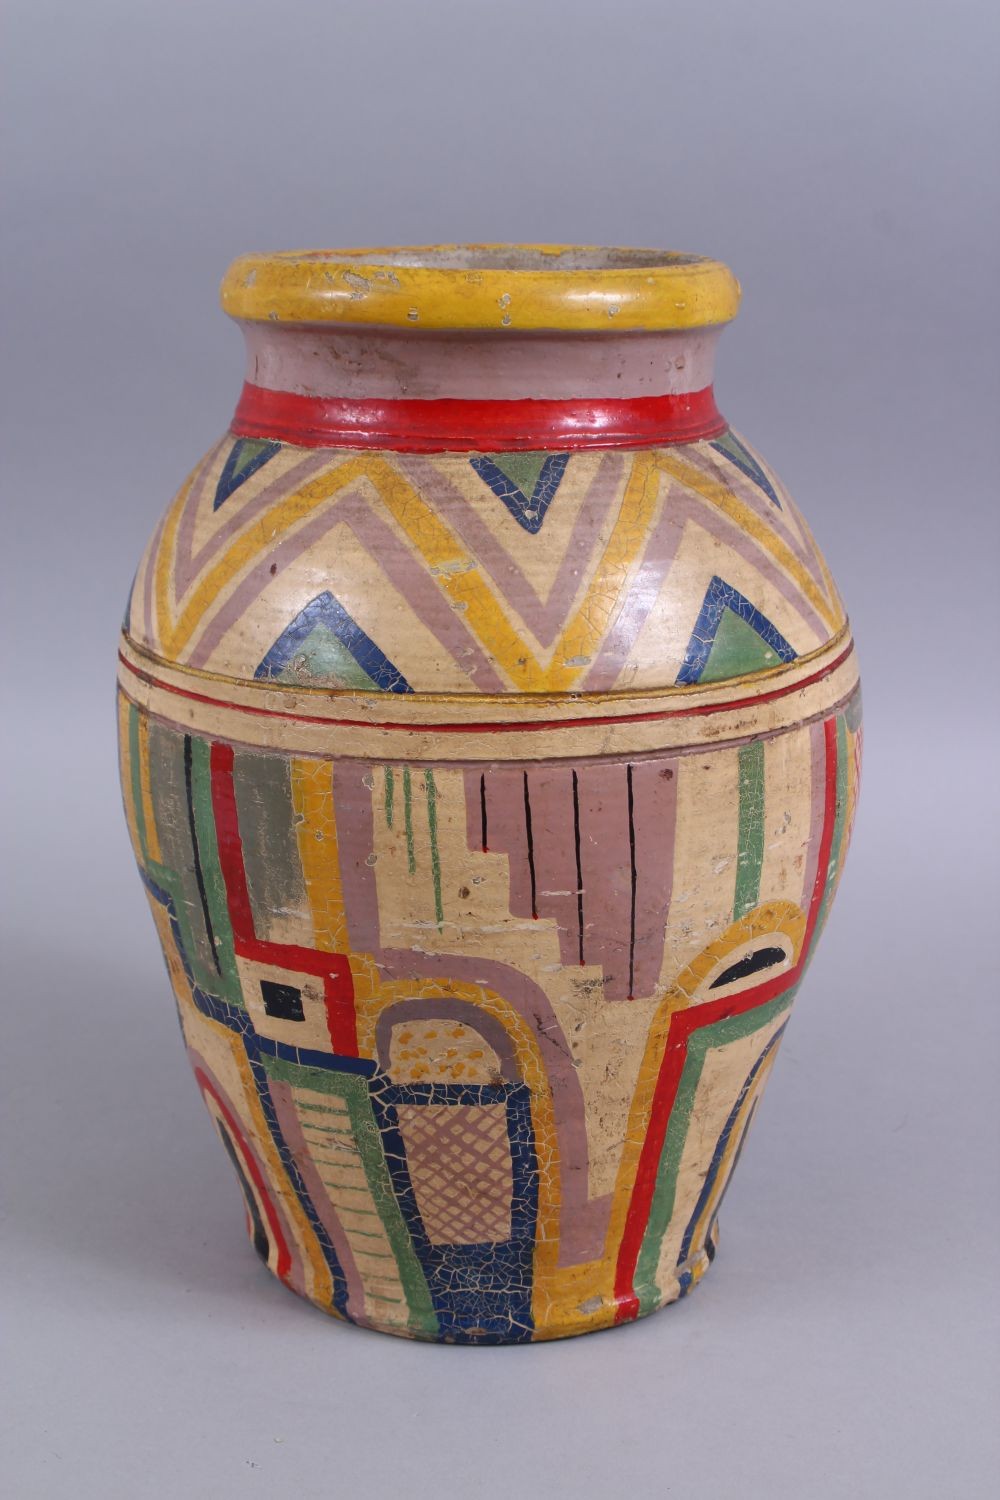 ATTRIBUTED TO THE OMEGA STUDIOS, CIRCA. 1930'S, GEOMETRIC PAINTED MONOCHROME VASE, similar designs - Image 3 of 4